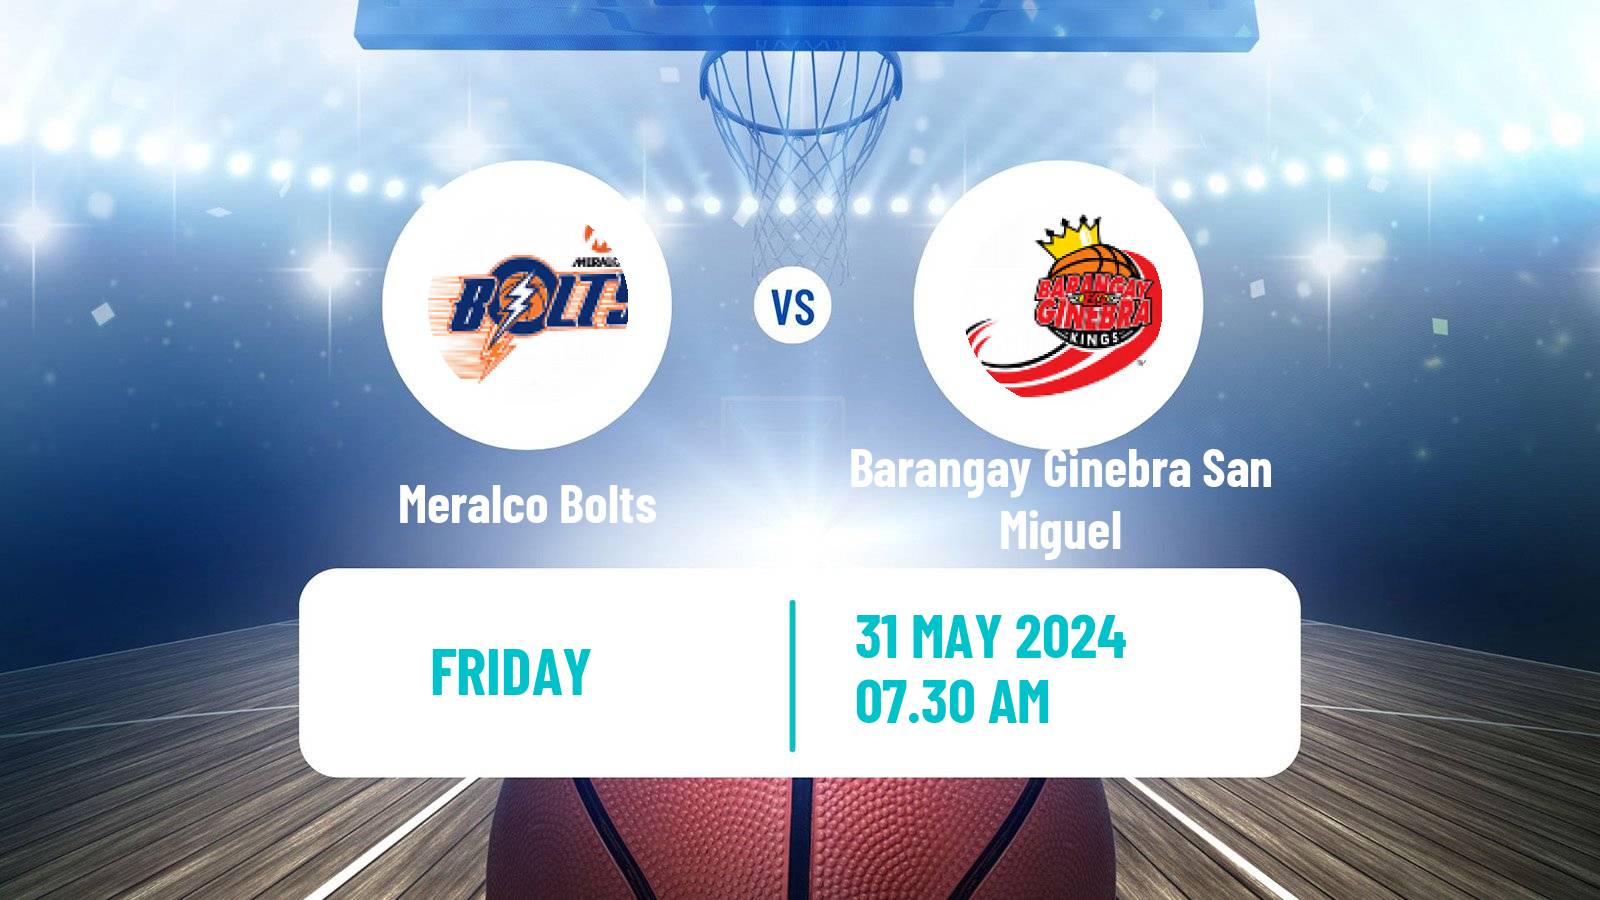 Basketball Philippines Cup Meralco Bolts - Barangay Ginebra San Miguel